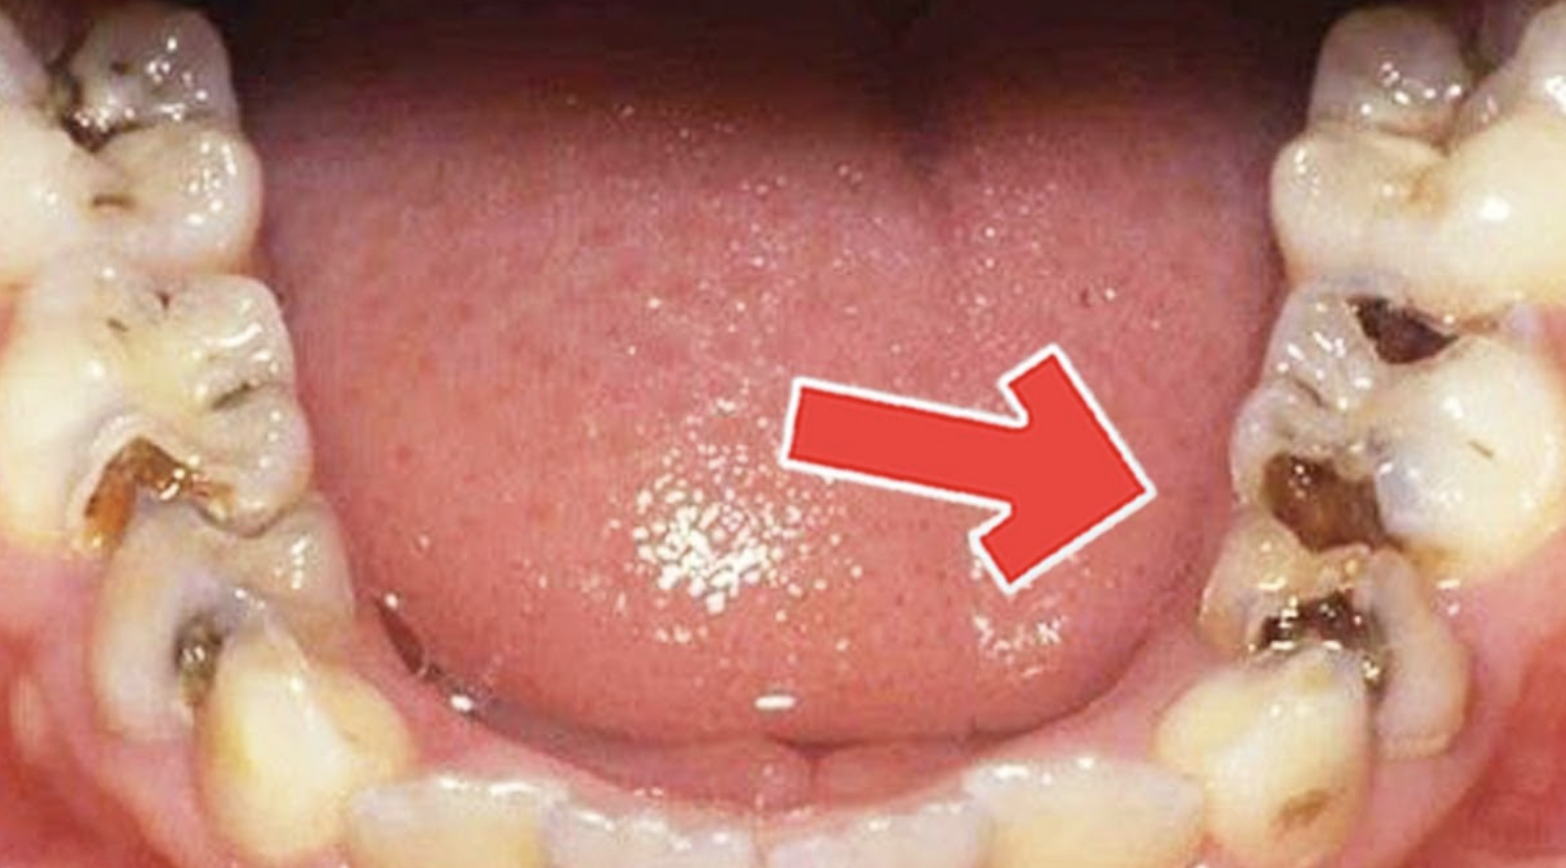 How To Get Rid of Tooth Diseases And Decay Easily At Home